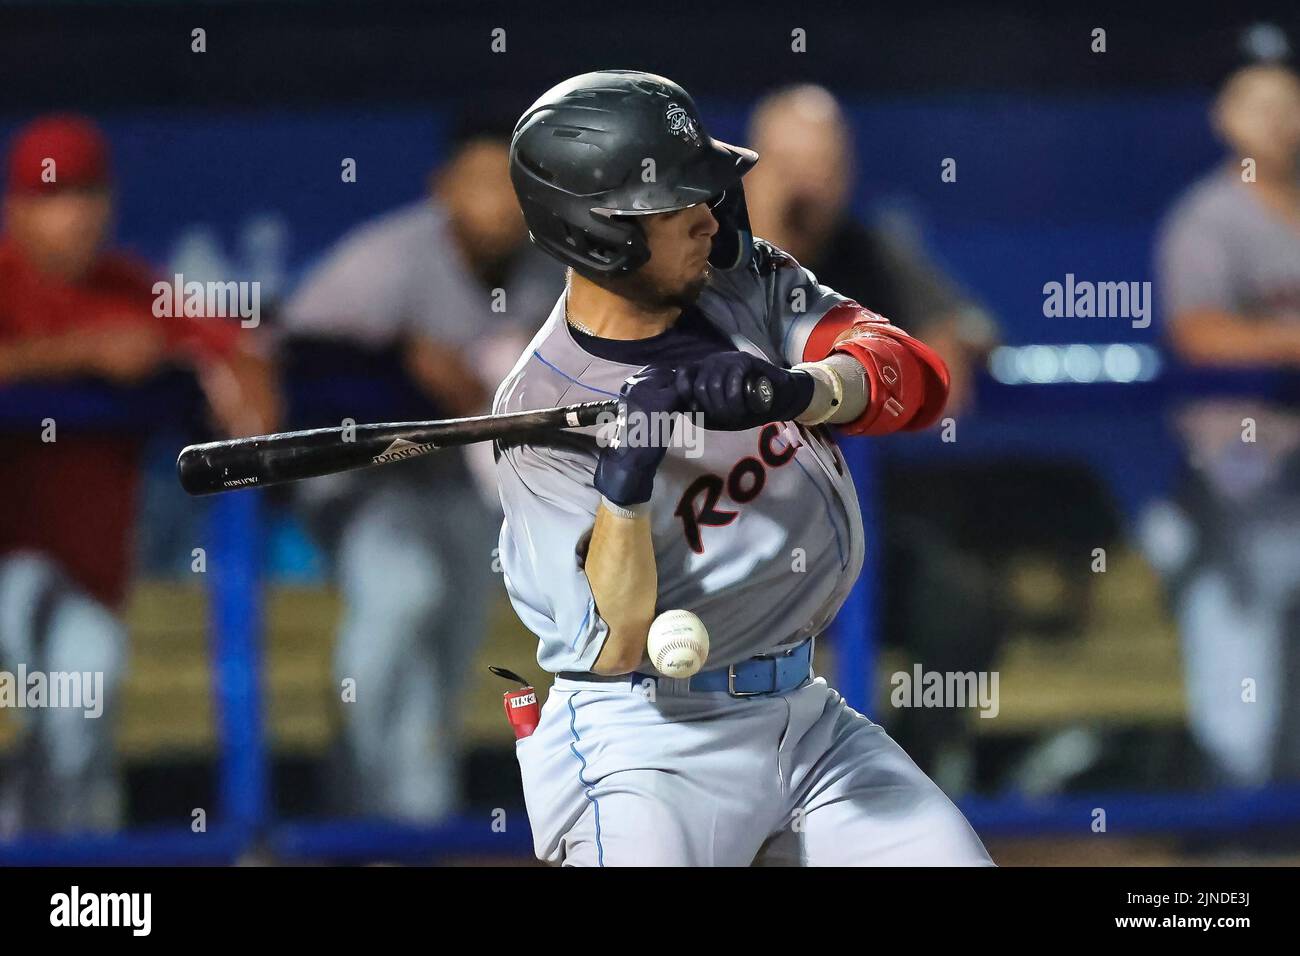 August 10, 2022: Rocket City Trash Pandas infielder Zach Neto (7) is hit by a pitch during an MiLB game between the Biloxi Shuckers and Rocket City Trash Pandas at MGM Park in Biloxi, Mississippi. Bobby McDuffie/CSM Stock Photo